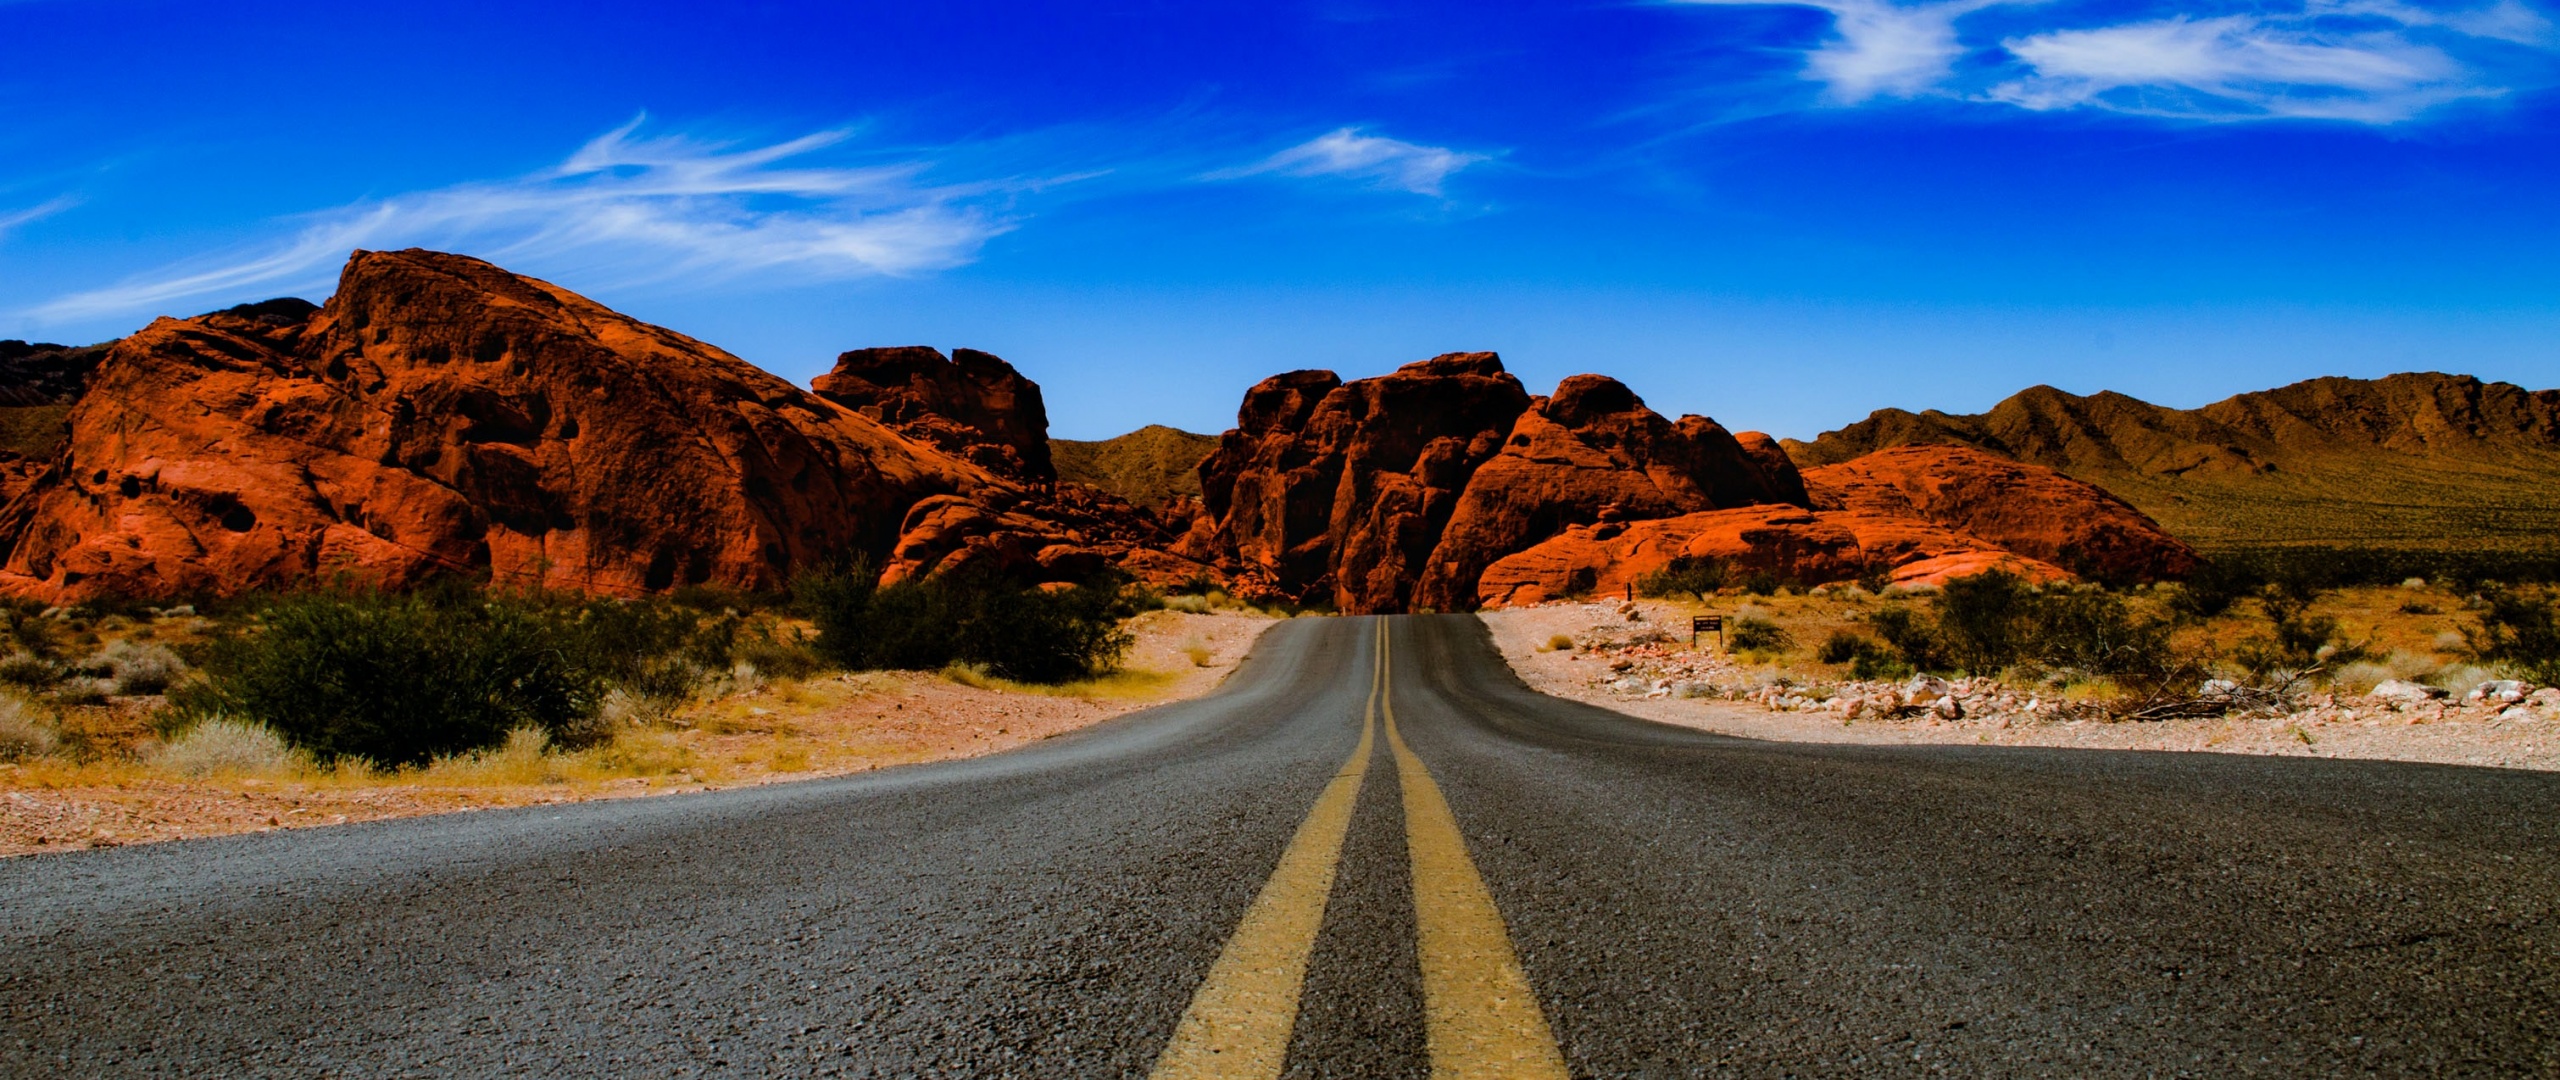 Valley of Fire State Park Wallpaper 4K, Nevada, United States, Nature, #4492